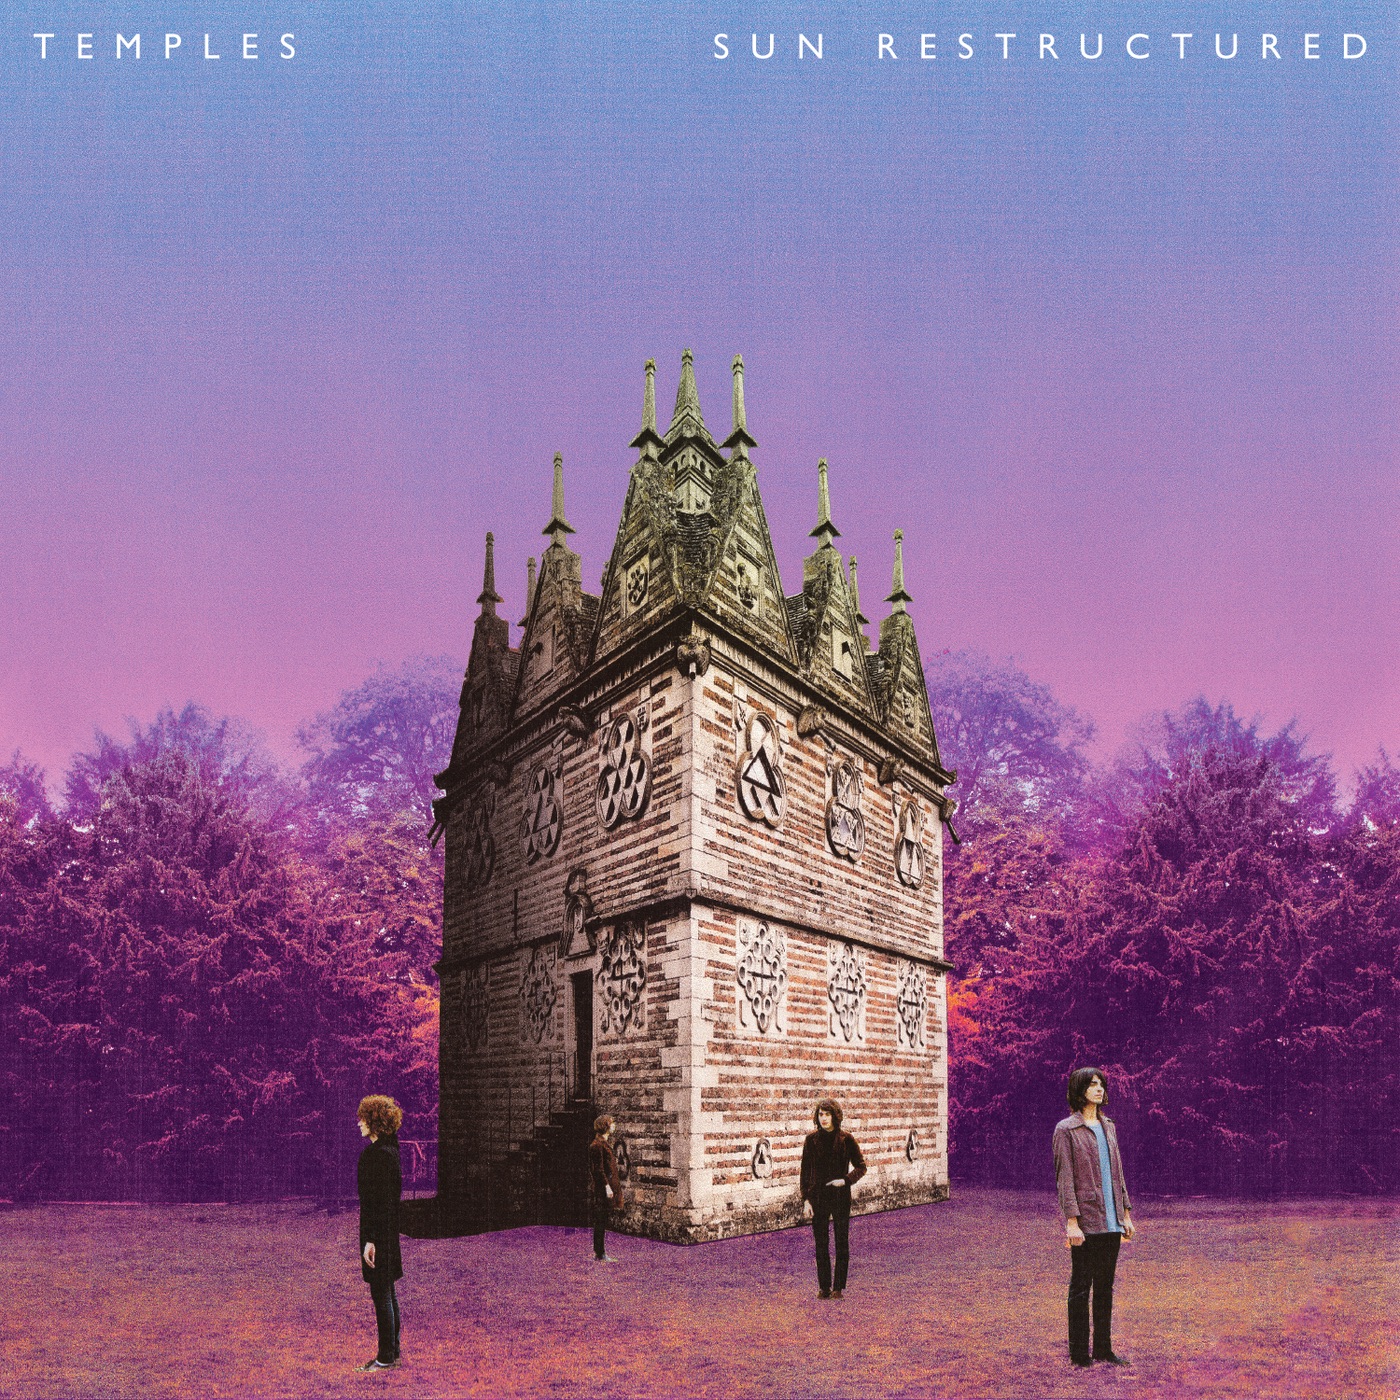 Temples Sun Restructured Download